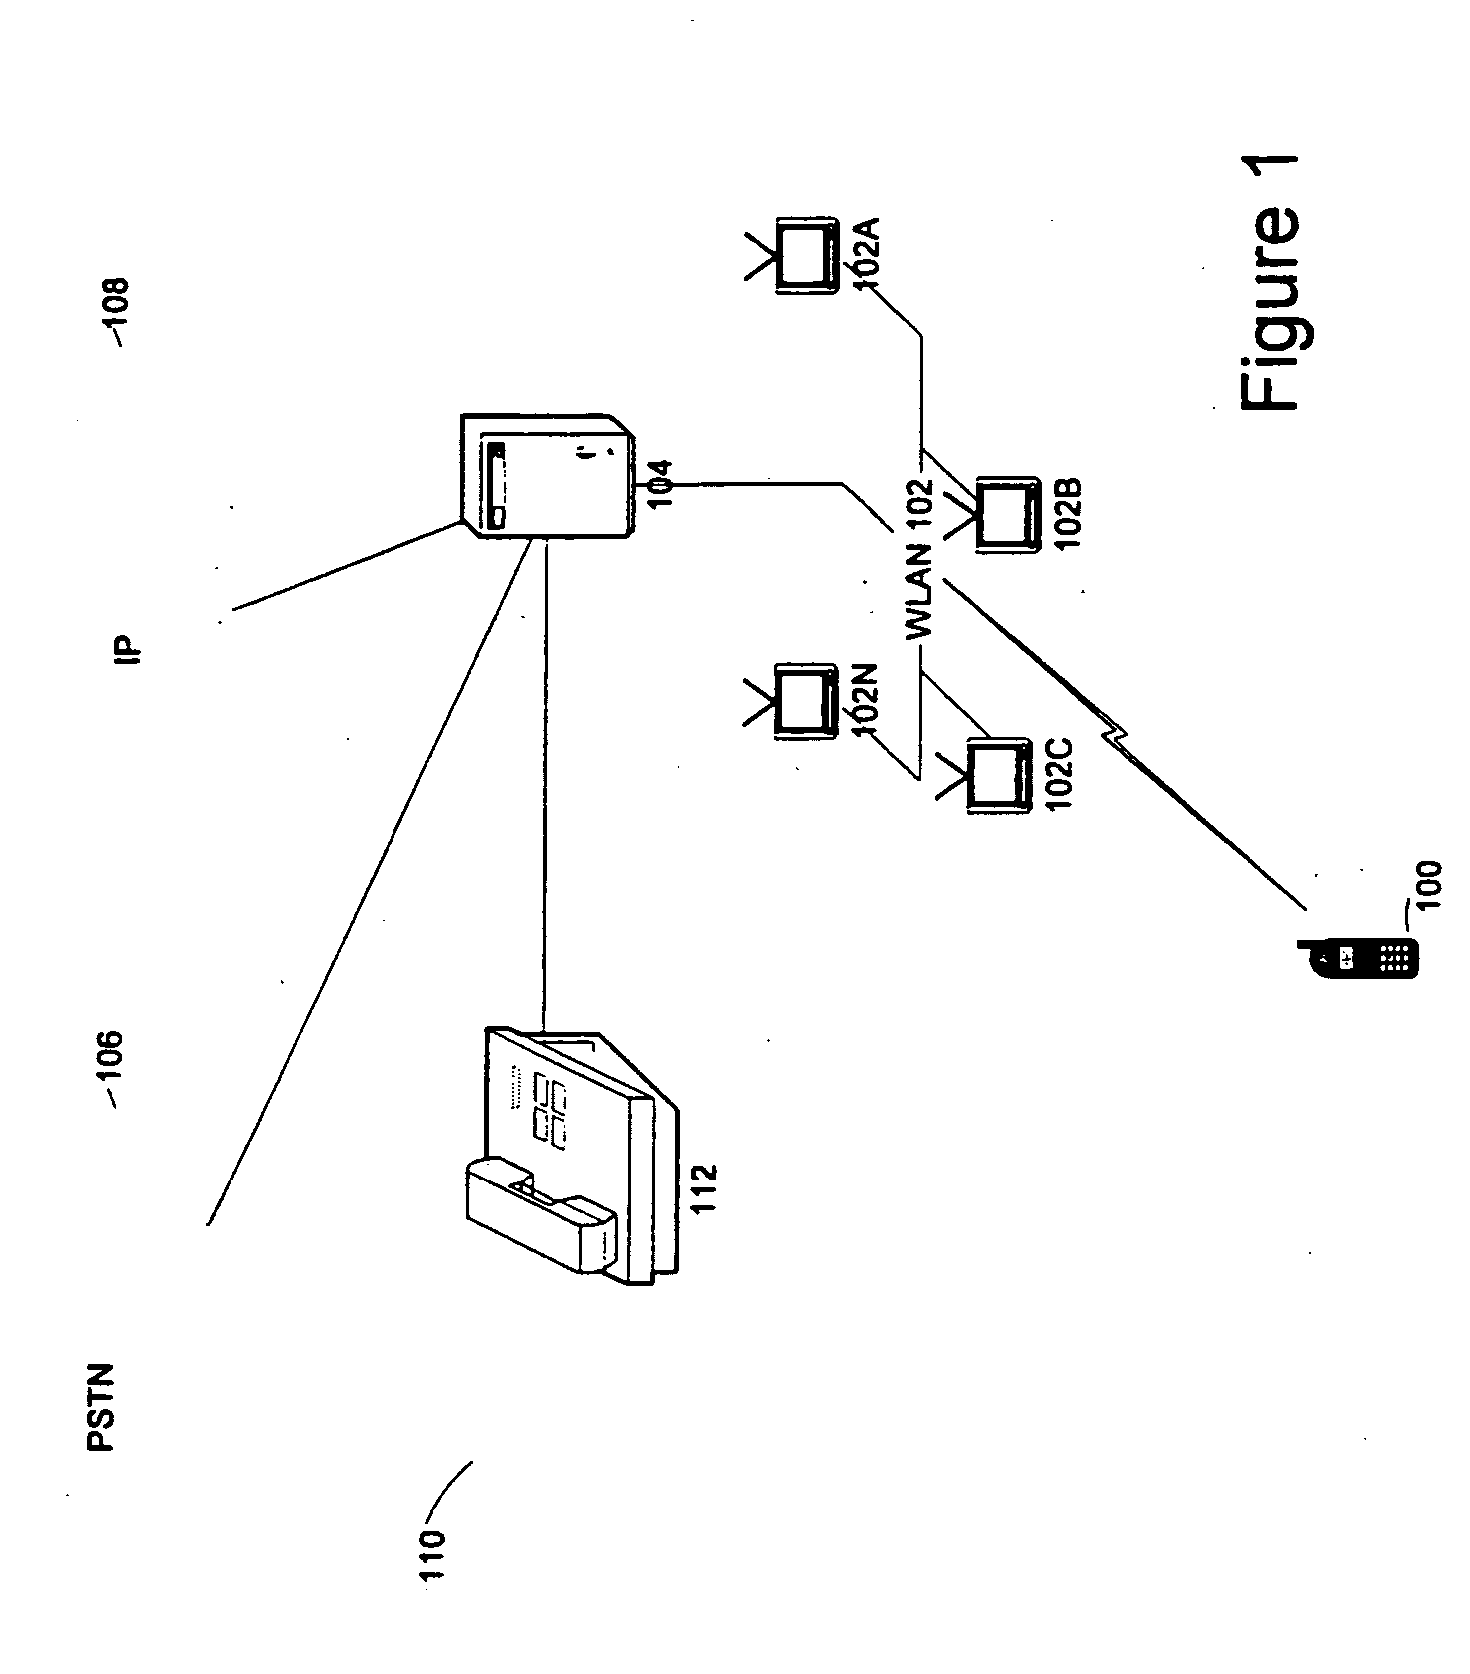 Extension of a local area phone system to a wide area network